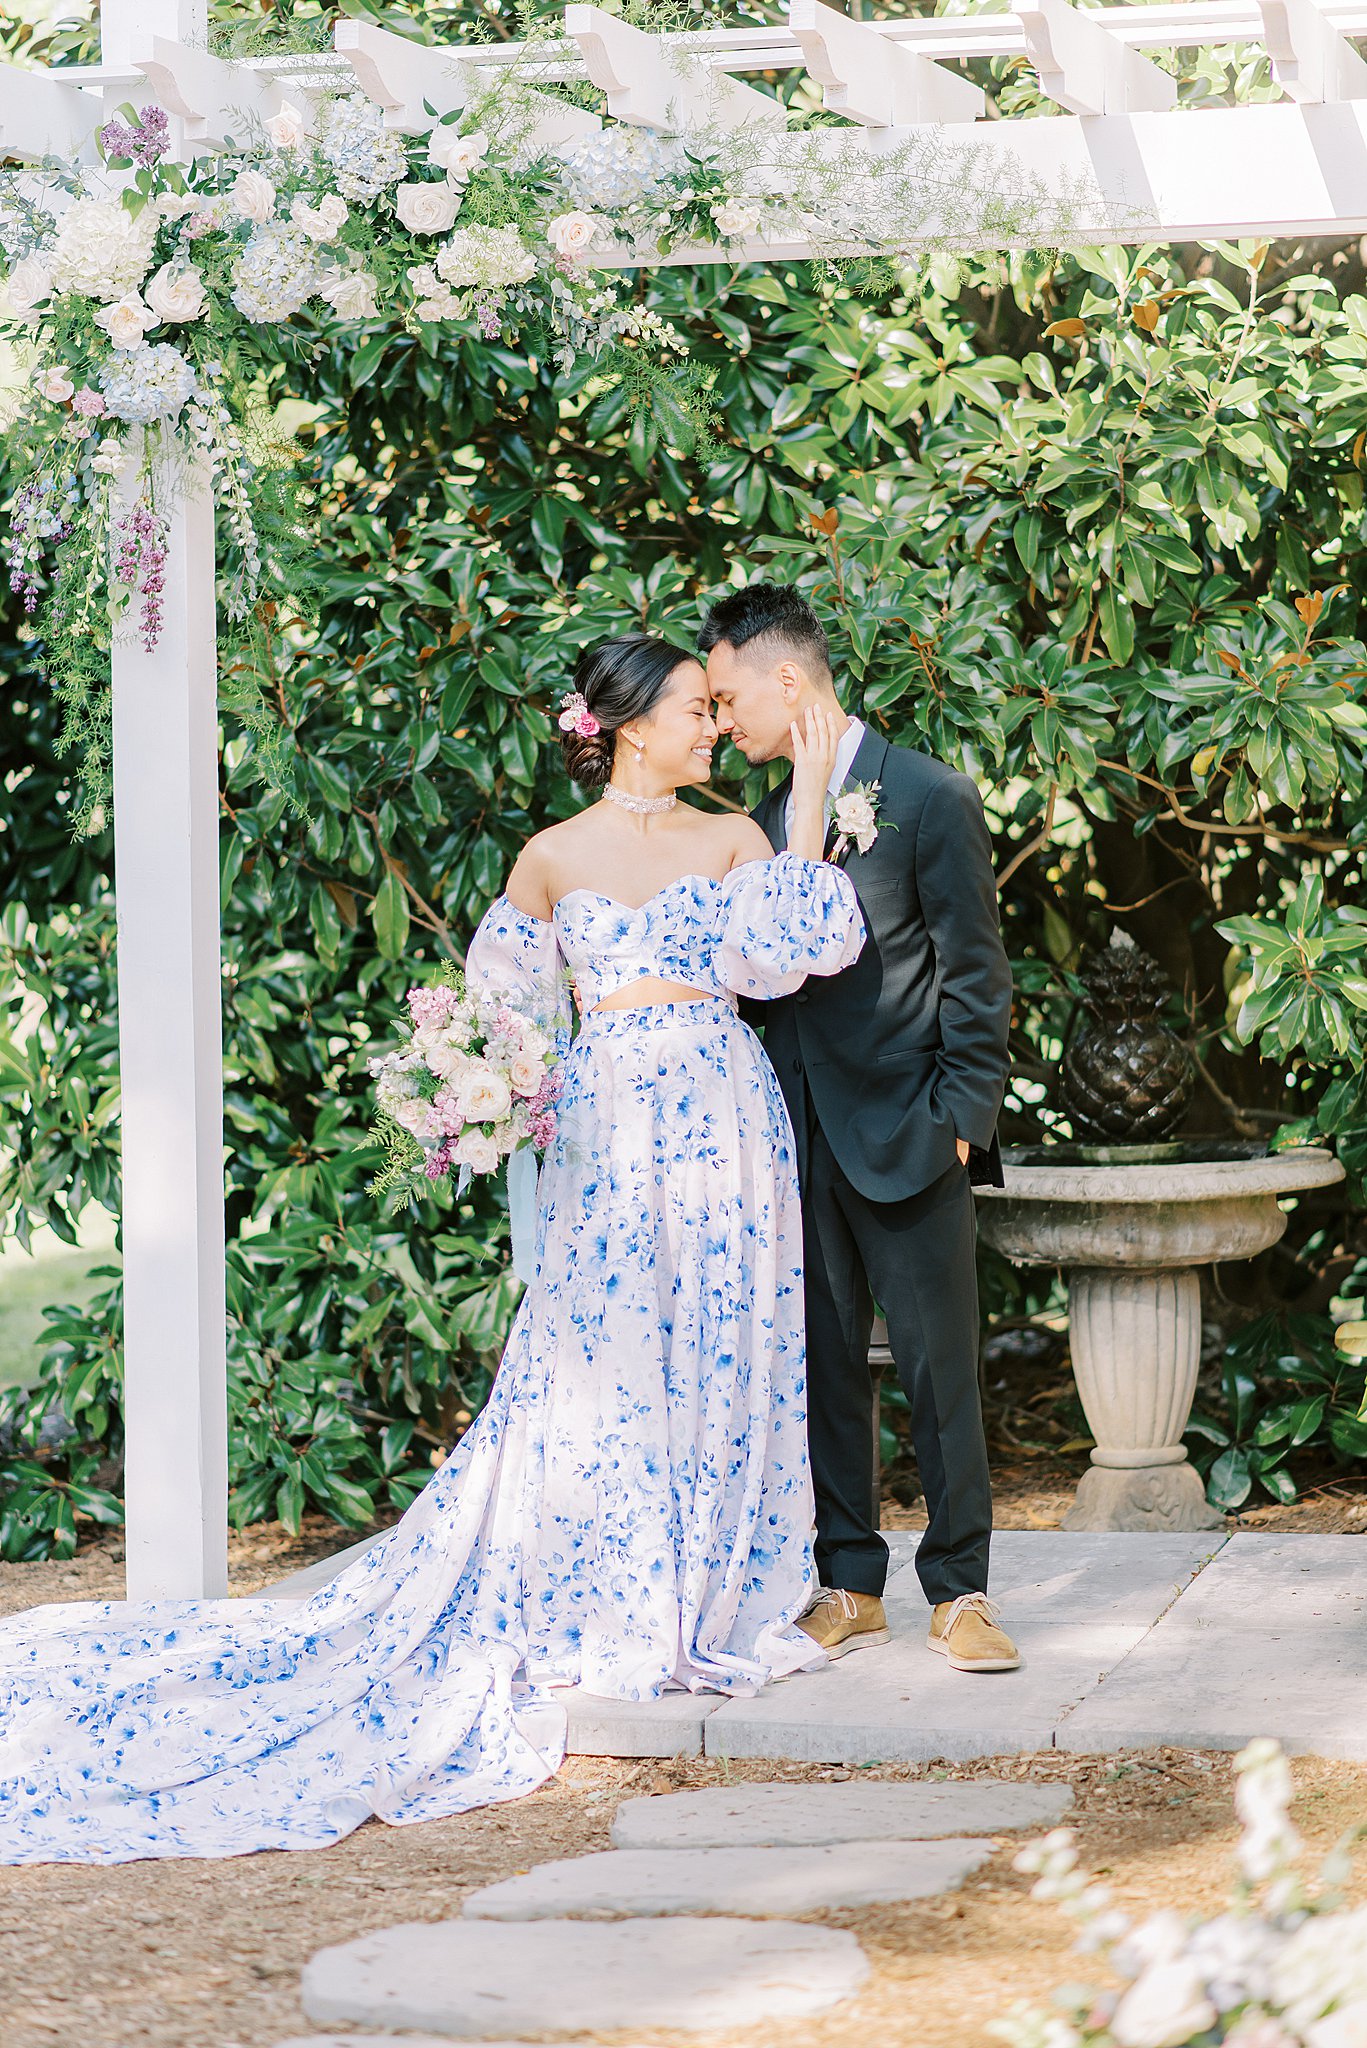 Newlyweds stand under their ceremony arbor in a blue gown and black suit